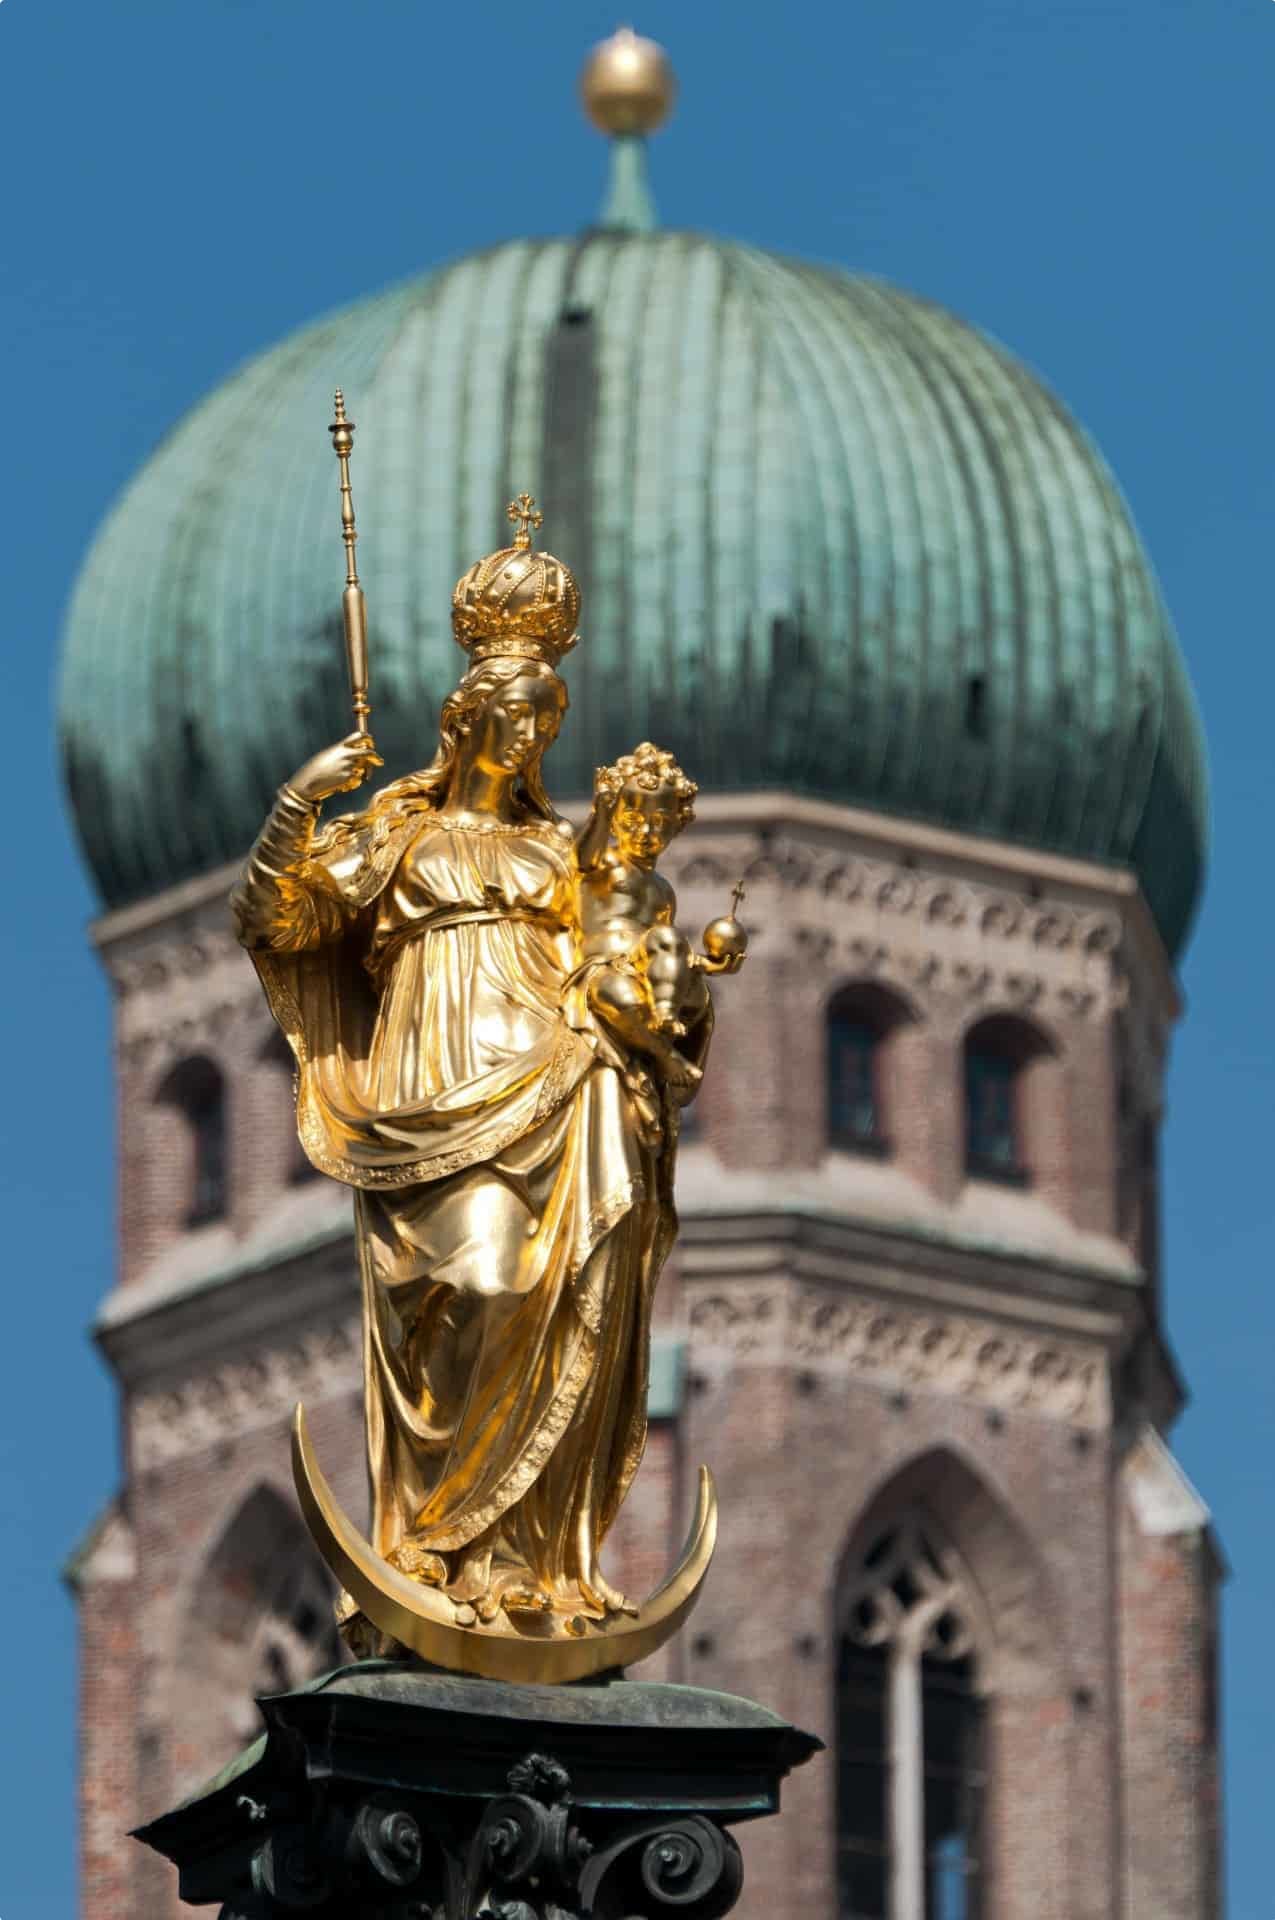 Munich Frauenkirche or Cathedral of our Lady in Munich, Germany